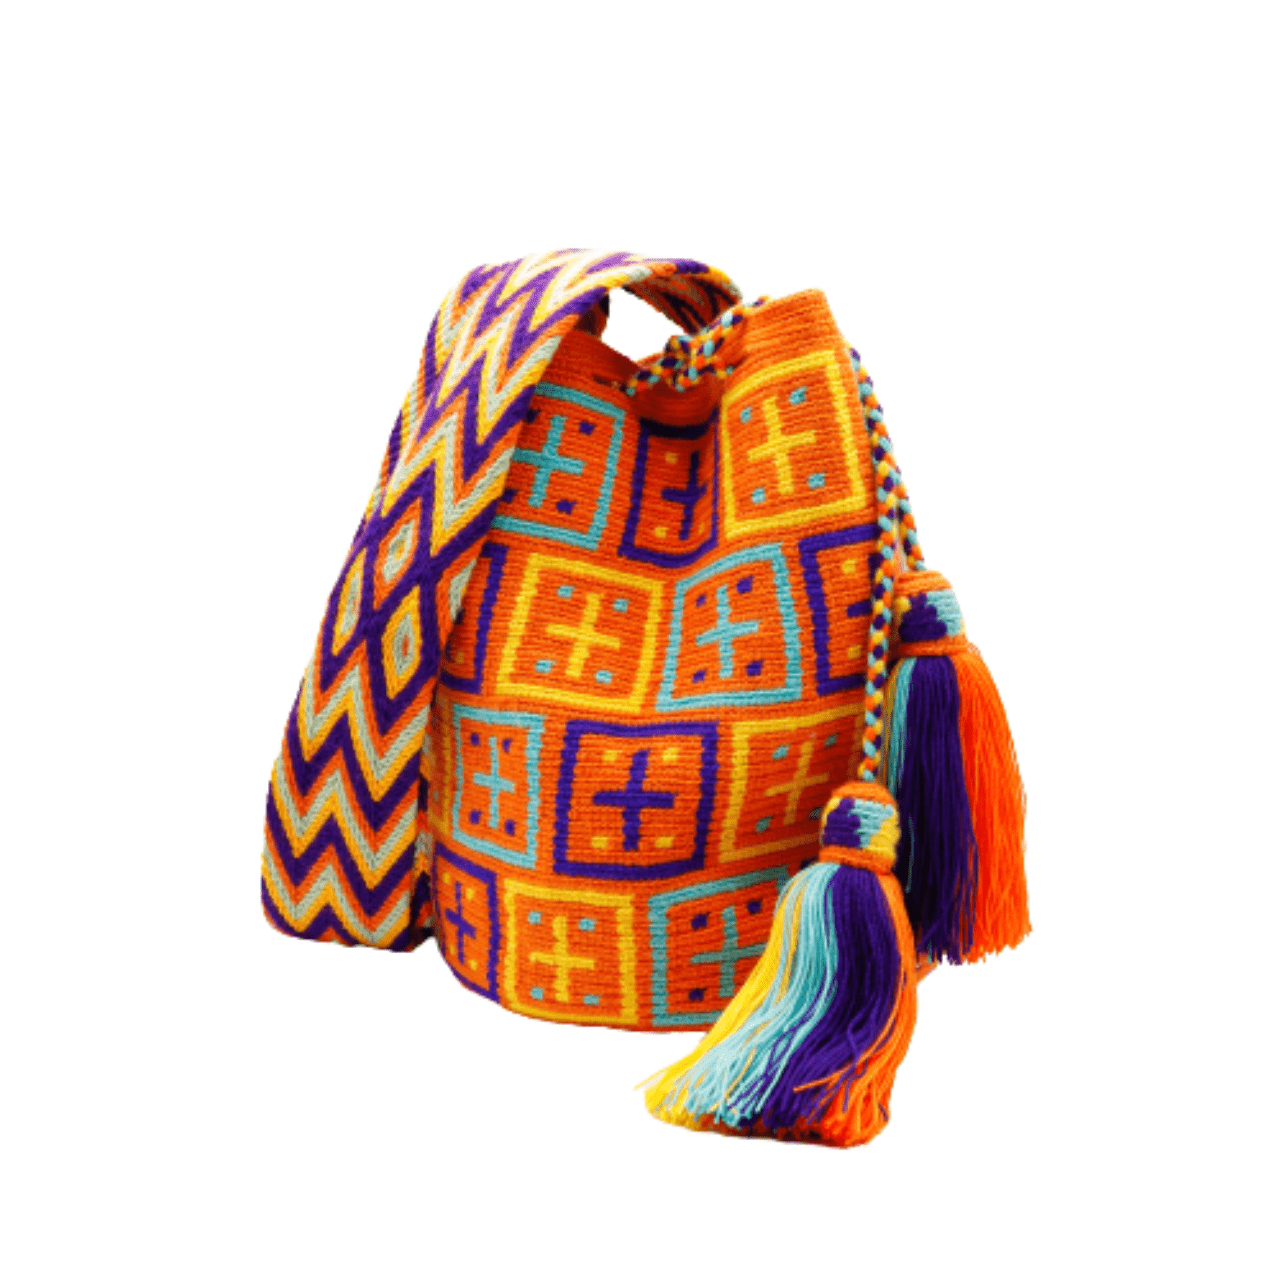 This gorgeous and unique Wayuu bag features a happy and vibrant palette of warm colors. Its eye-catching beauty will draw attention wherever you go. Shop now and make a statement with this stunning Wayuu bag.